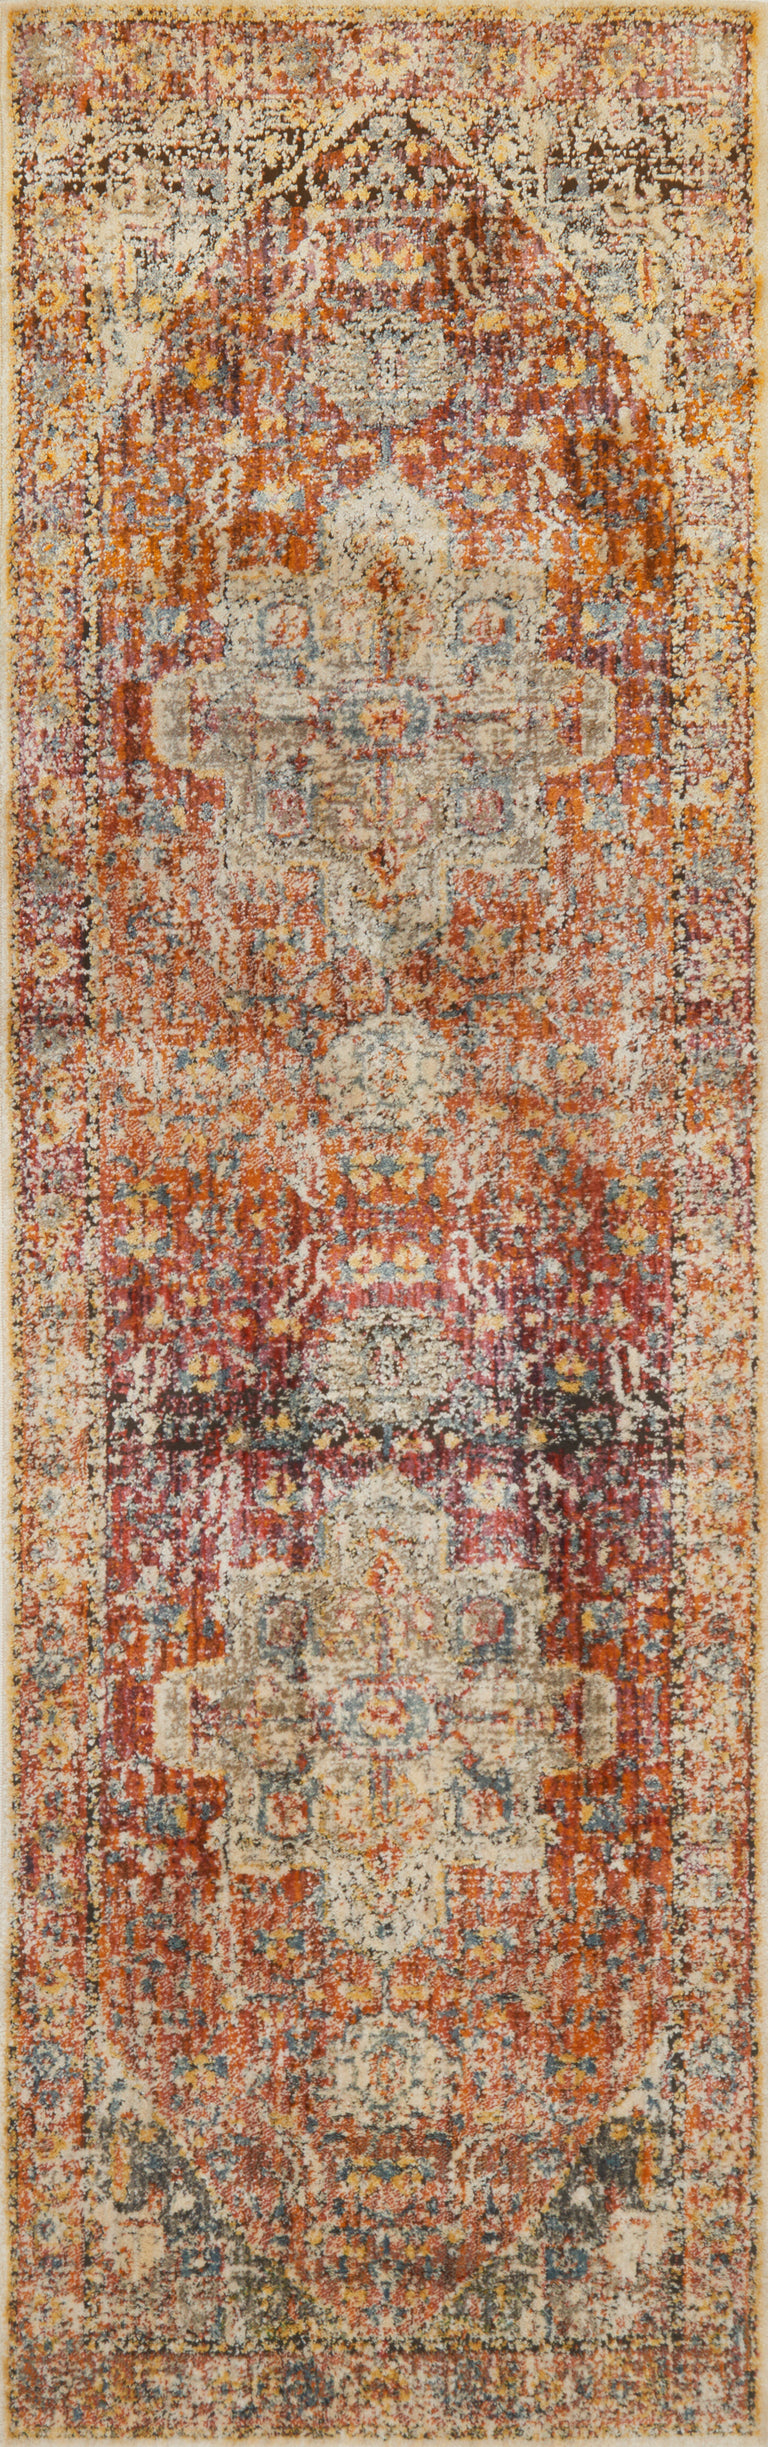 Loloi Rugs Javari Collection Rug in Berry, Sunrise - 12'0" x 15'0"